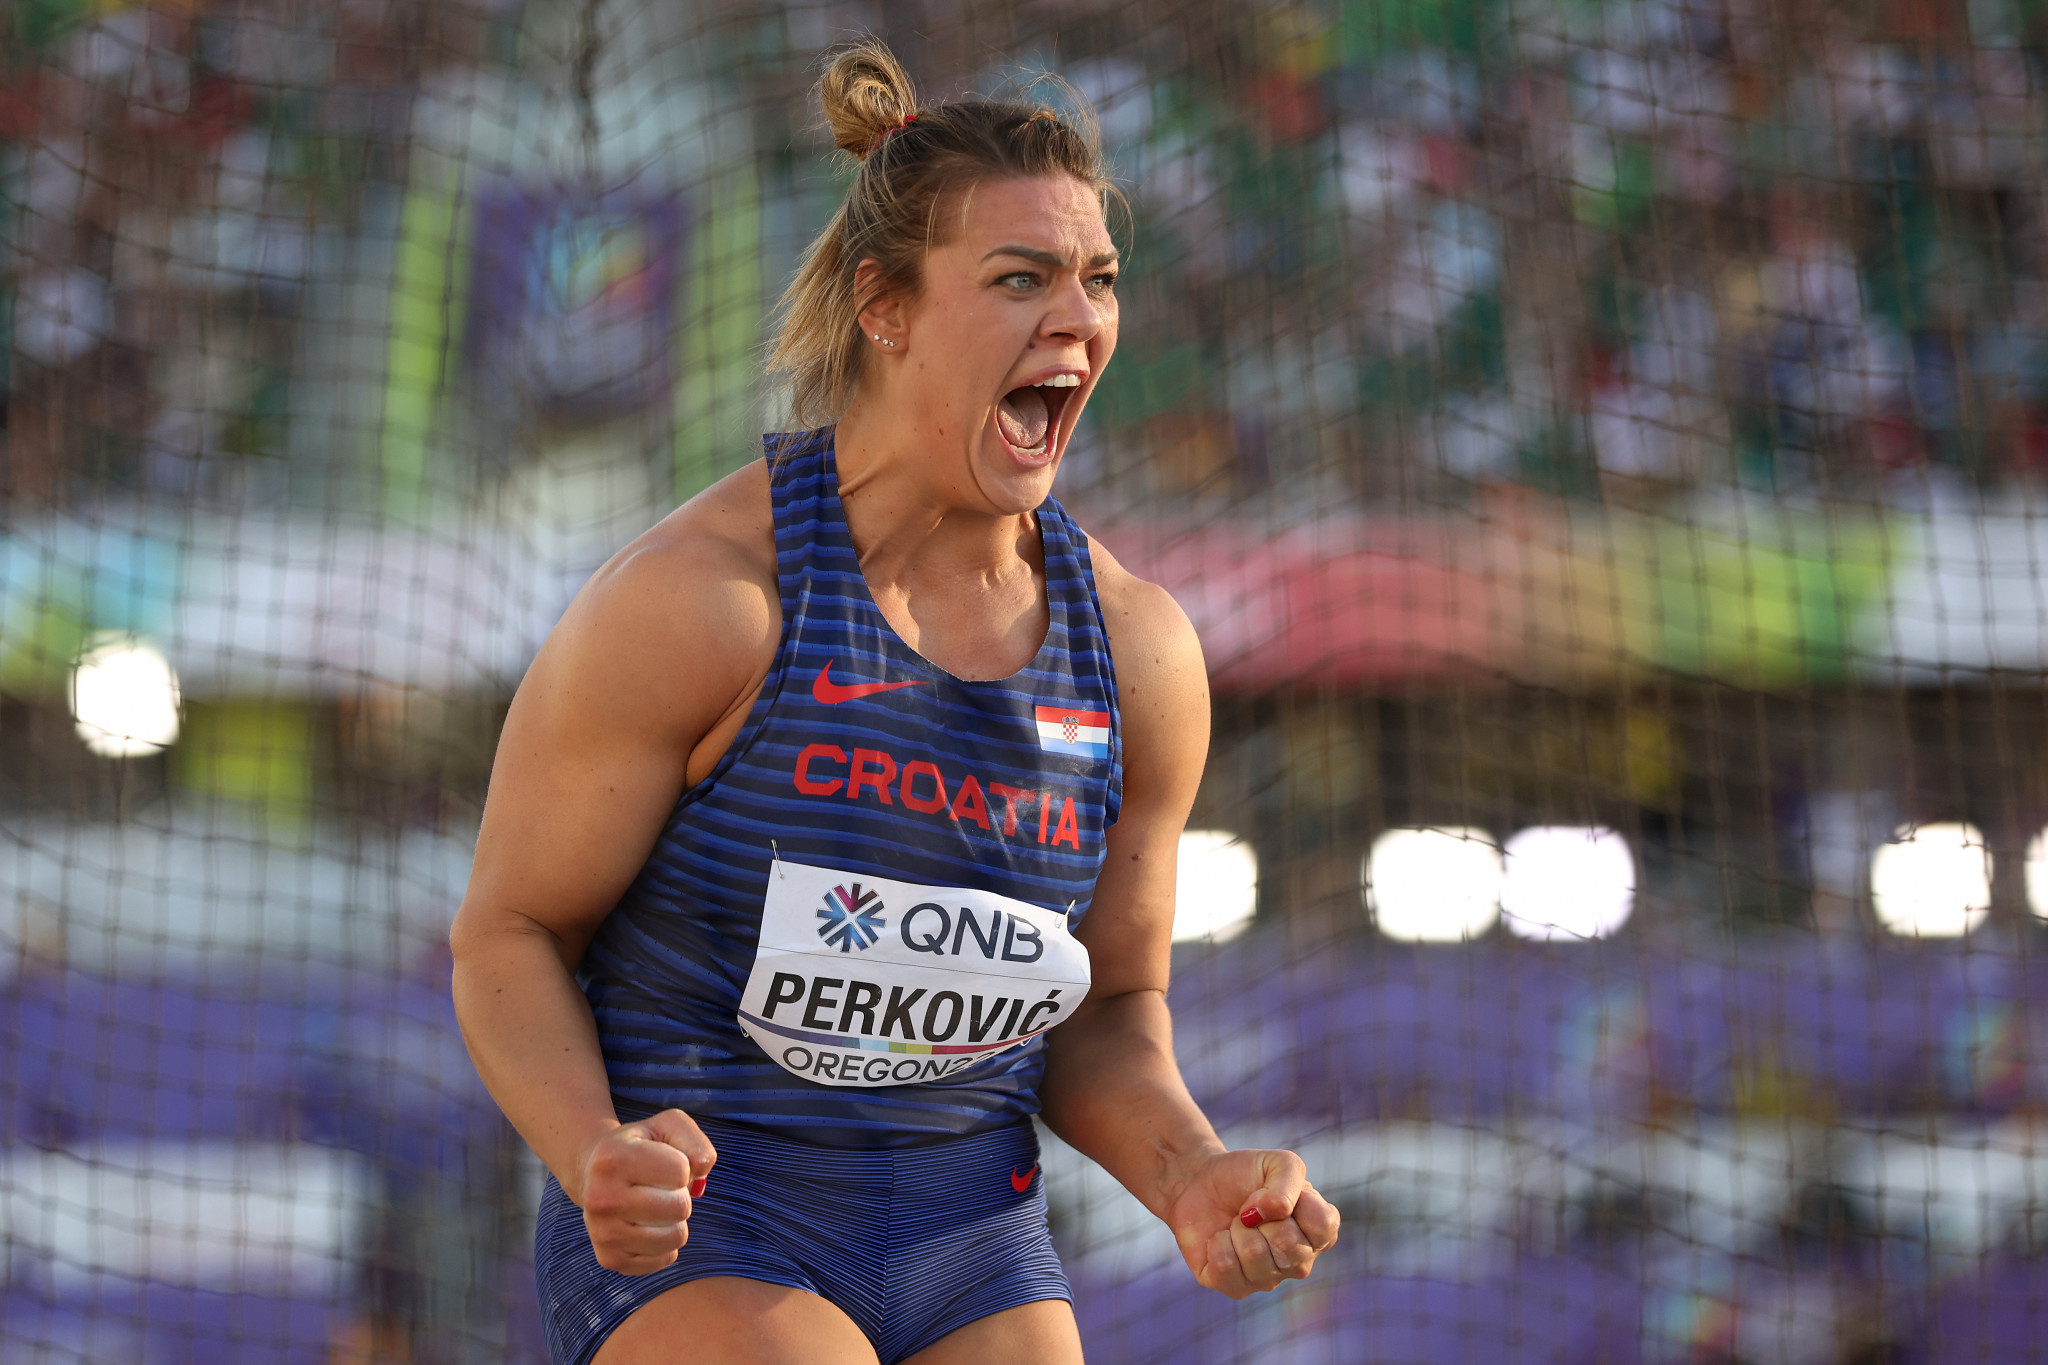 Croatia's Sandra Perković podiumed at the World Athletics Championships for the fifth time in a row, becoming the first woman to do so, as she secured silver with a throw of 68.45m ©Getty Images